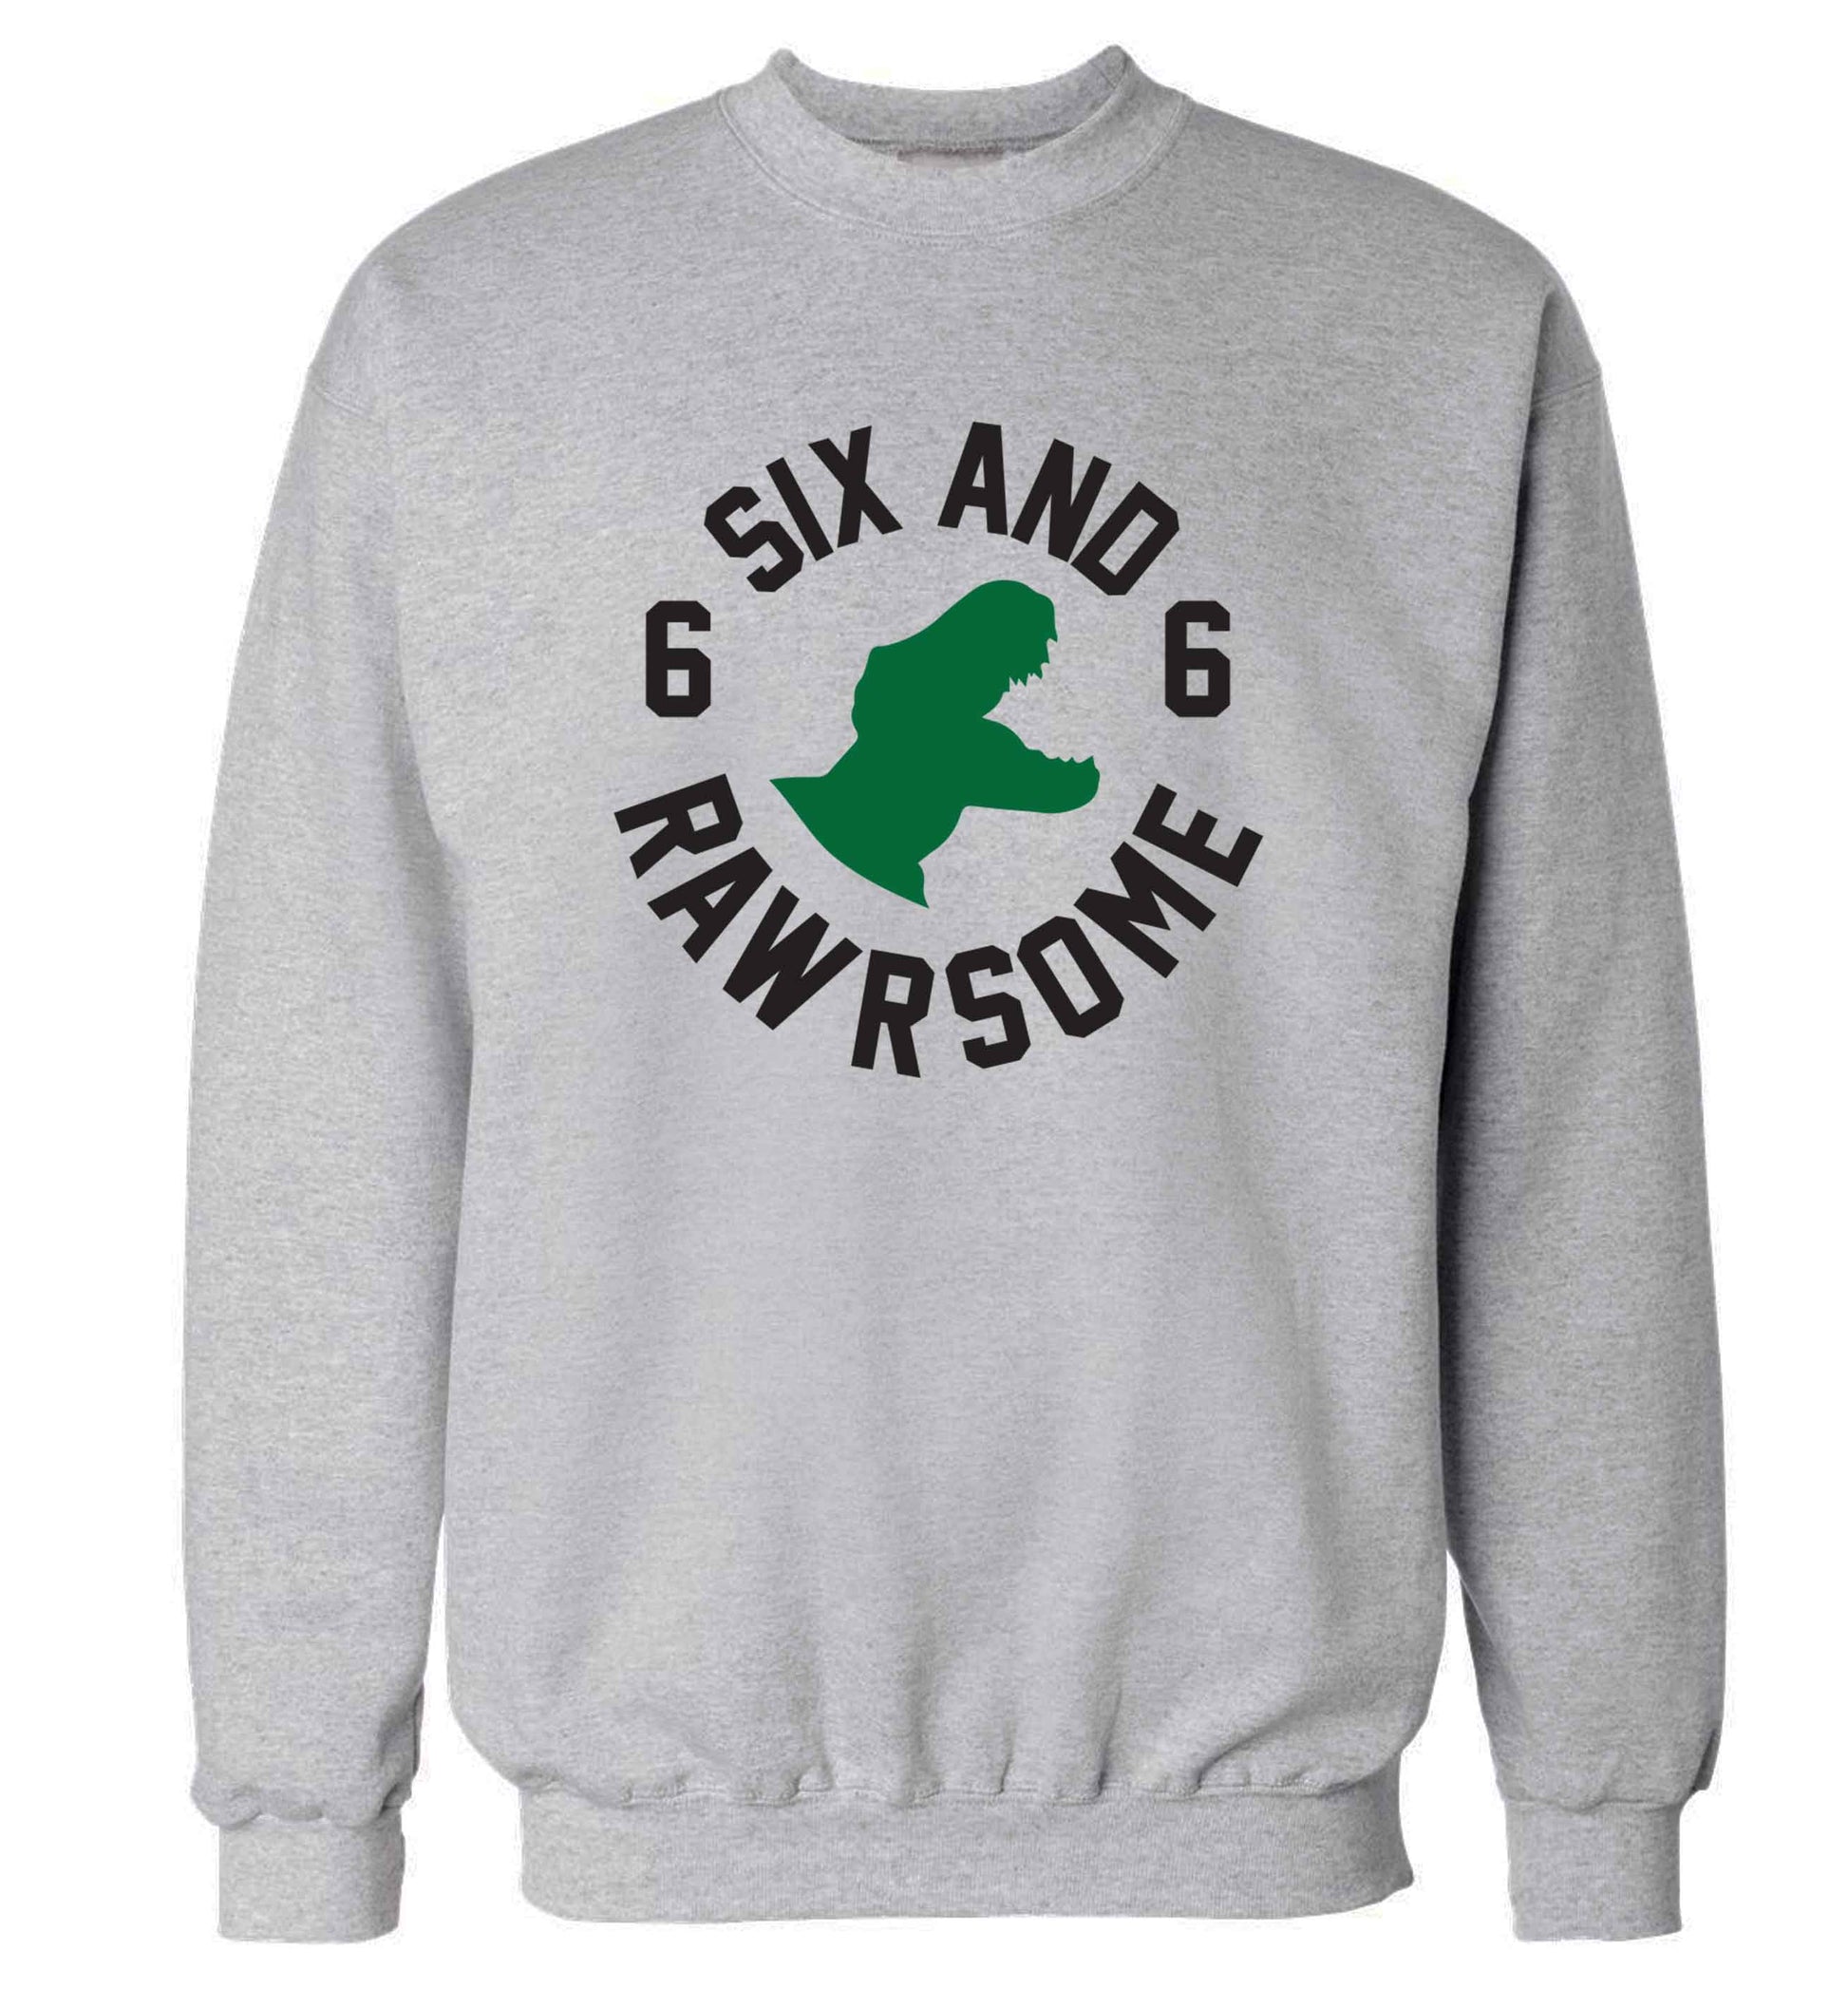 Six and rawrsome adult's unisex grey sweater 2XL